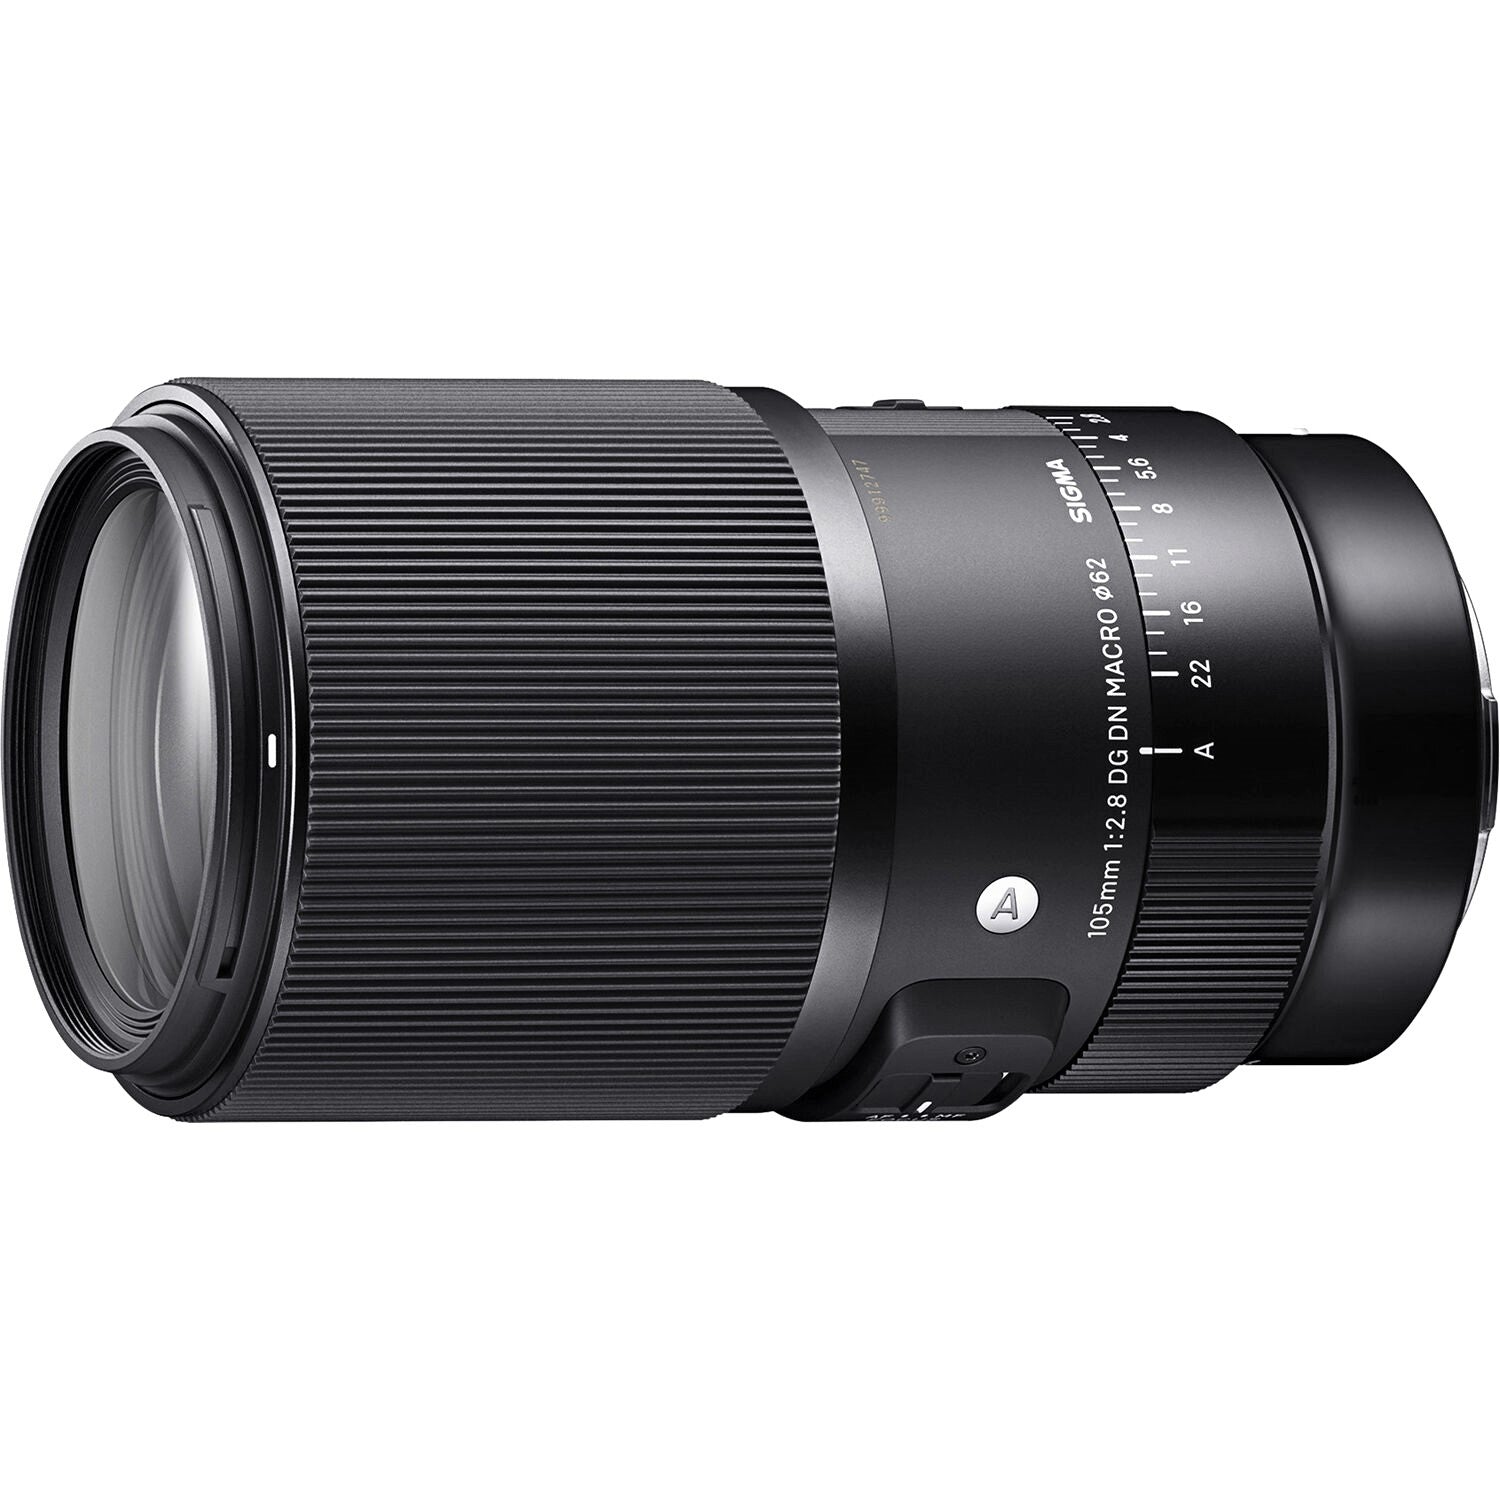 Sigma 105mm F2.8 DG DN Macro Art Lens for Leica L in a Side View